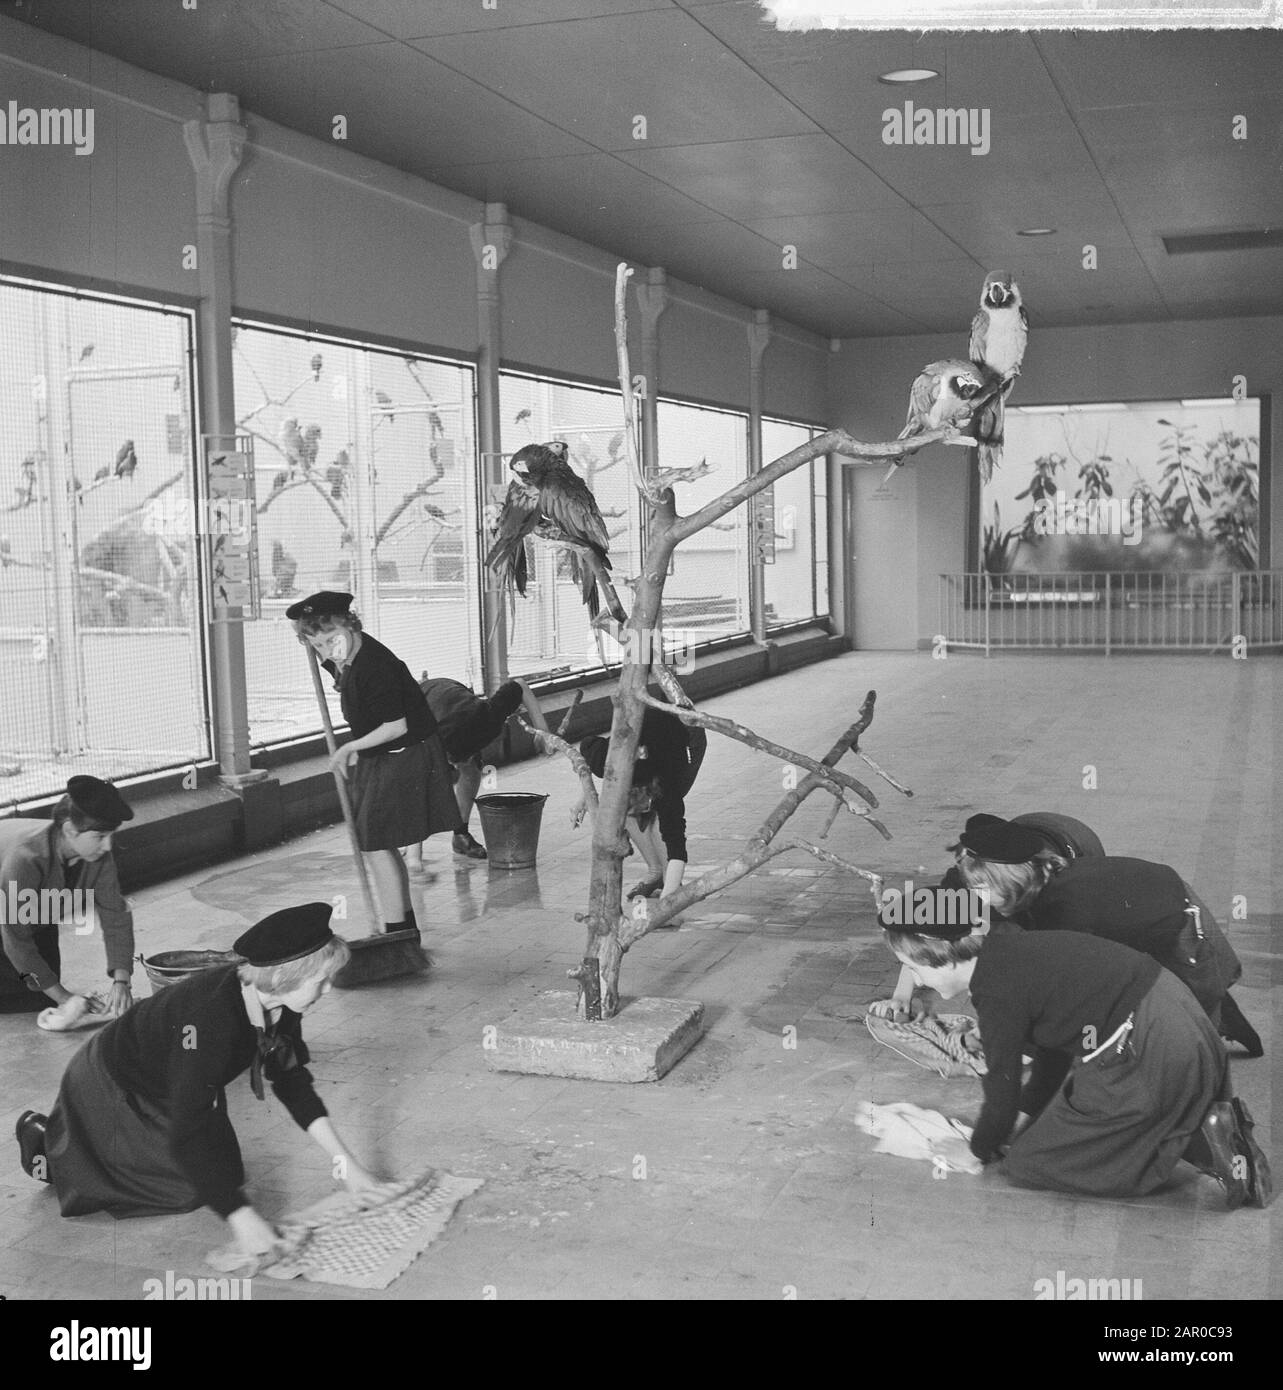 Heitty for a chore, Boy Scouts clean the night places of Artis. The birdhouse Date: 18 april 1963 Location: Amsterdam, Noord-Holland Keywords: zoos, boy scout, parrots Institution name: Artis Stock Photo